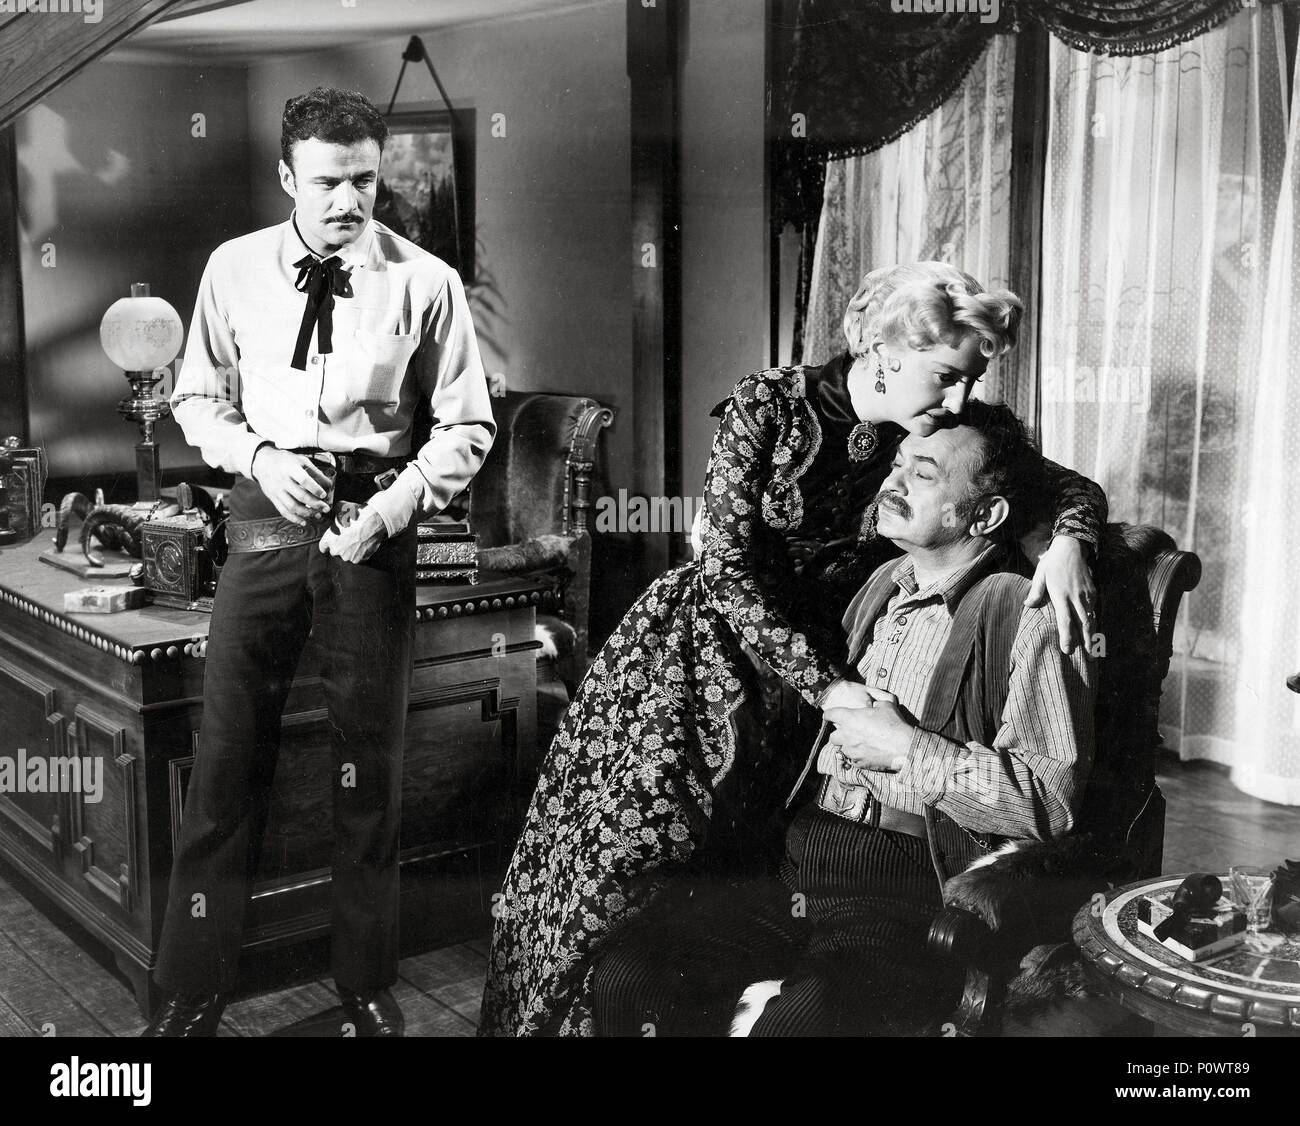 Original Film Title: THE VIOLENT MEN.  English Title: BANDITS, THE.  Film Director: RUDOLPH MATE.  Year: 1955.  Stars: BRIAN KEITH; EDWARD G. ROBINSON; BARBARA STANWYCK. Credit: COLUMBIA PICTURES / Album Stock Photo